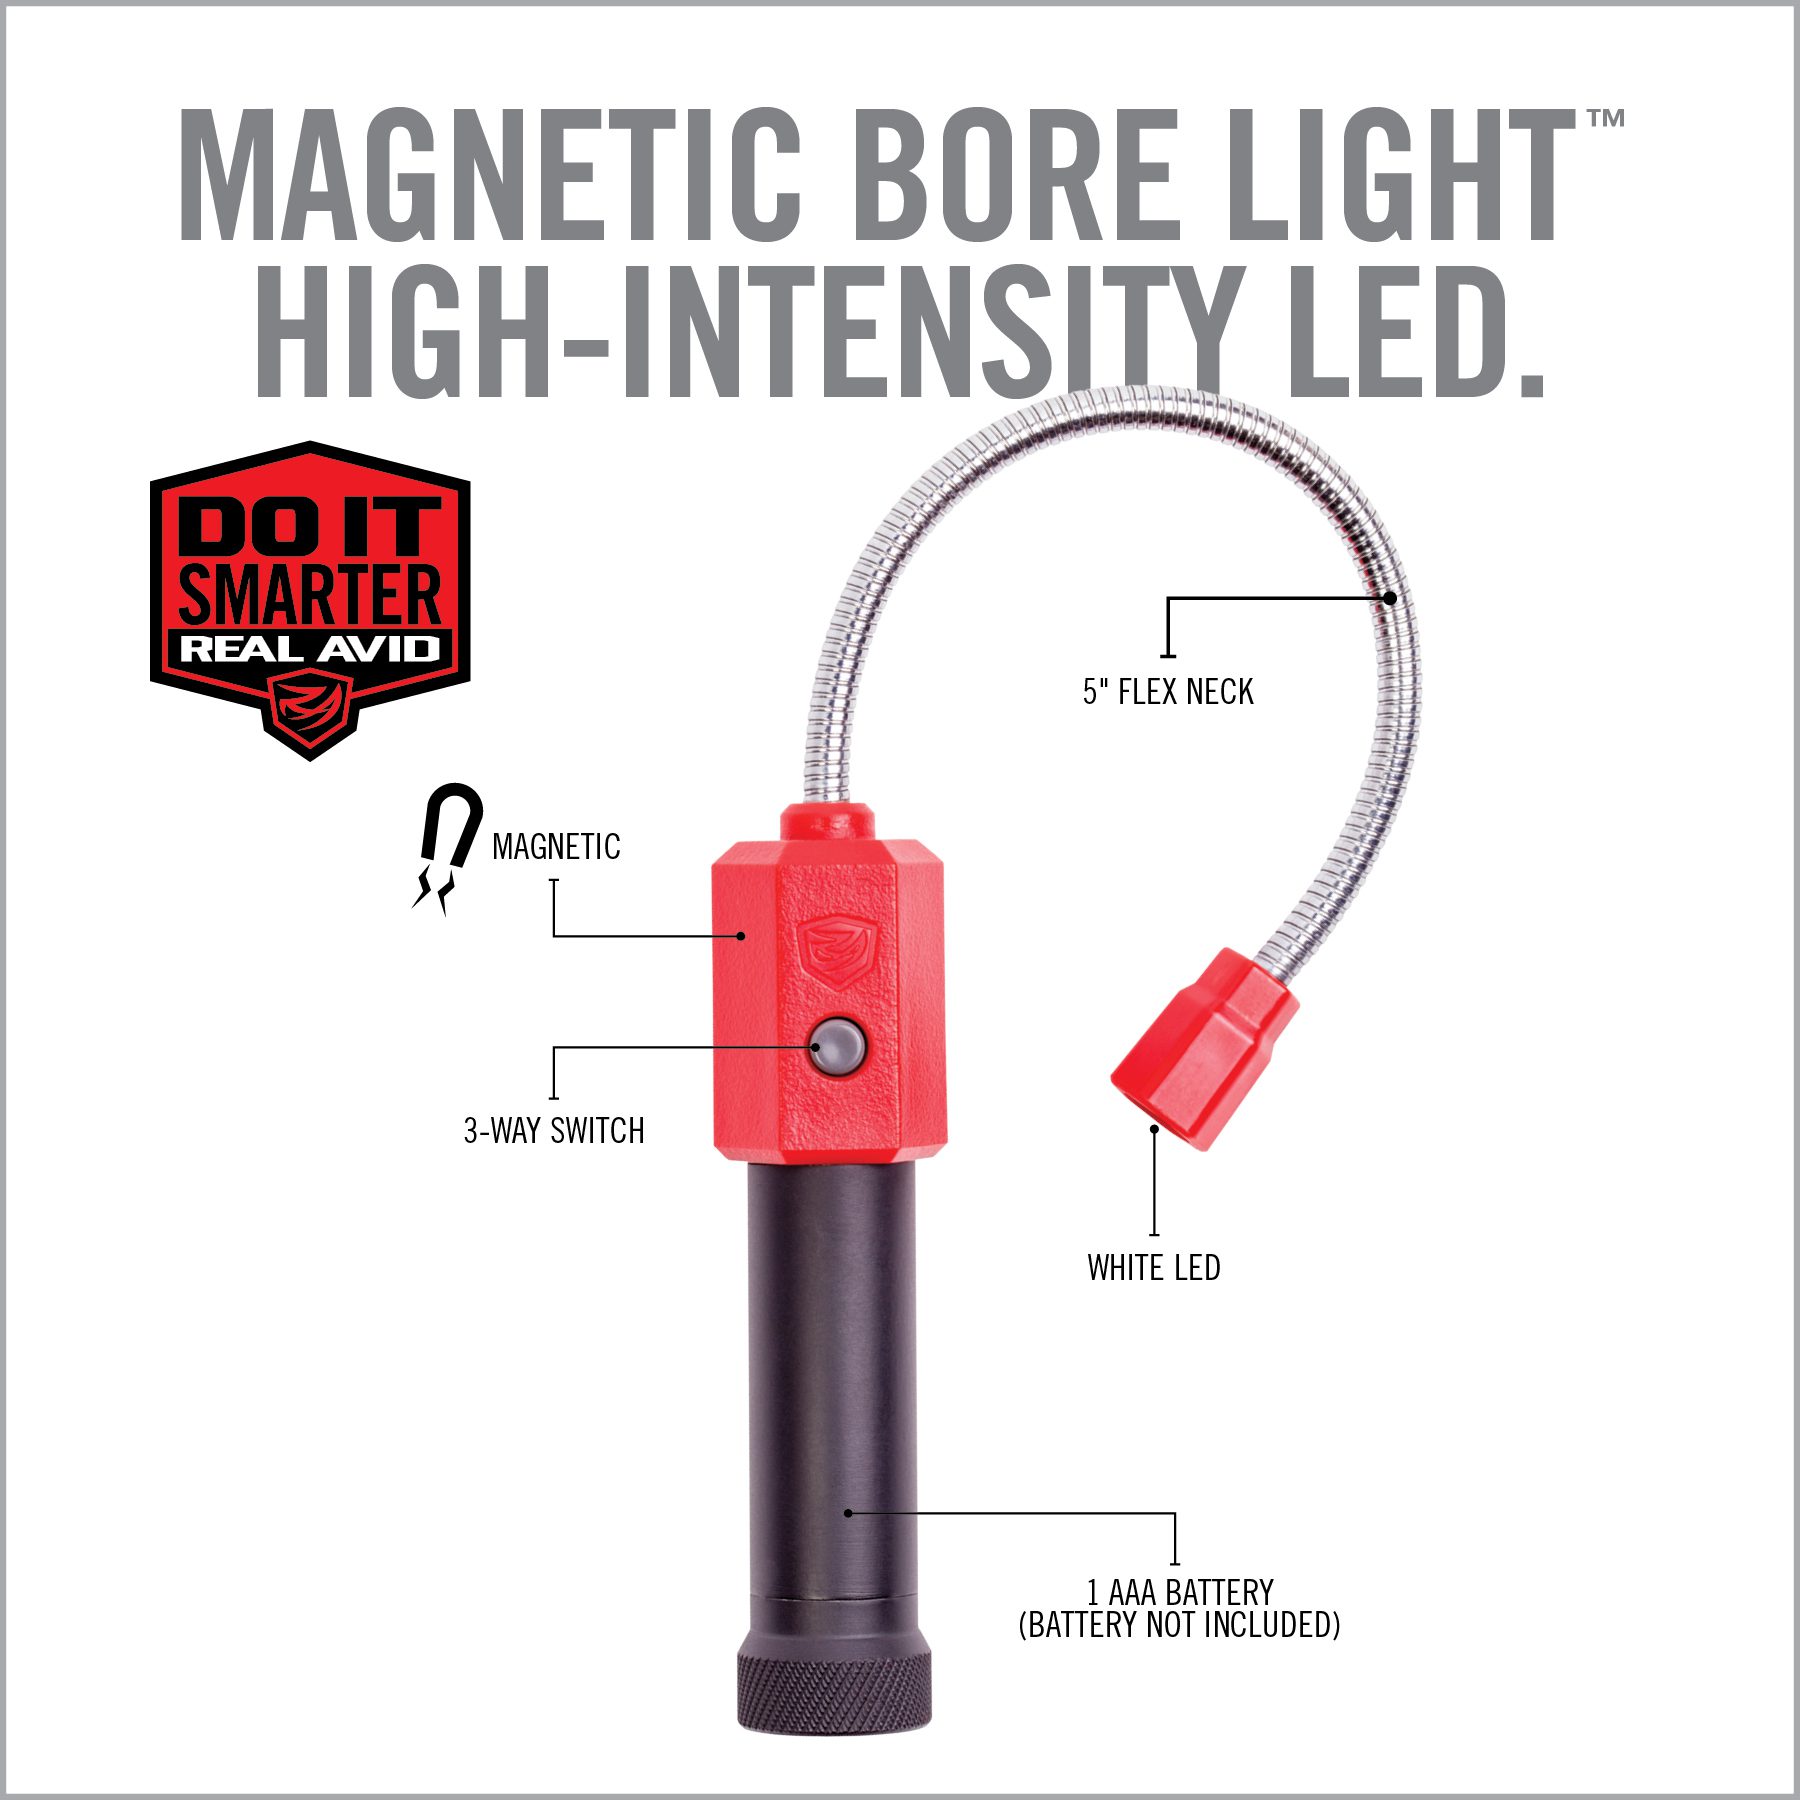 the magnetic bore light is shown with instructions